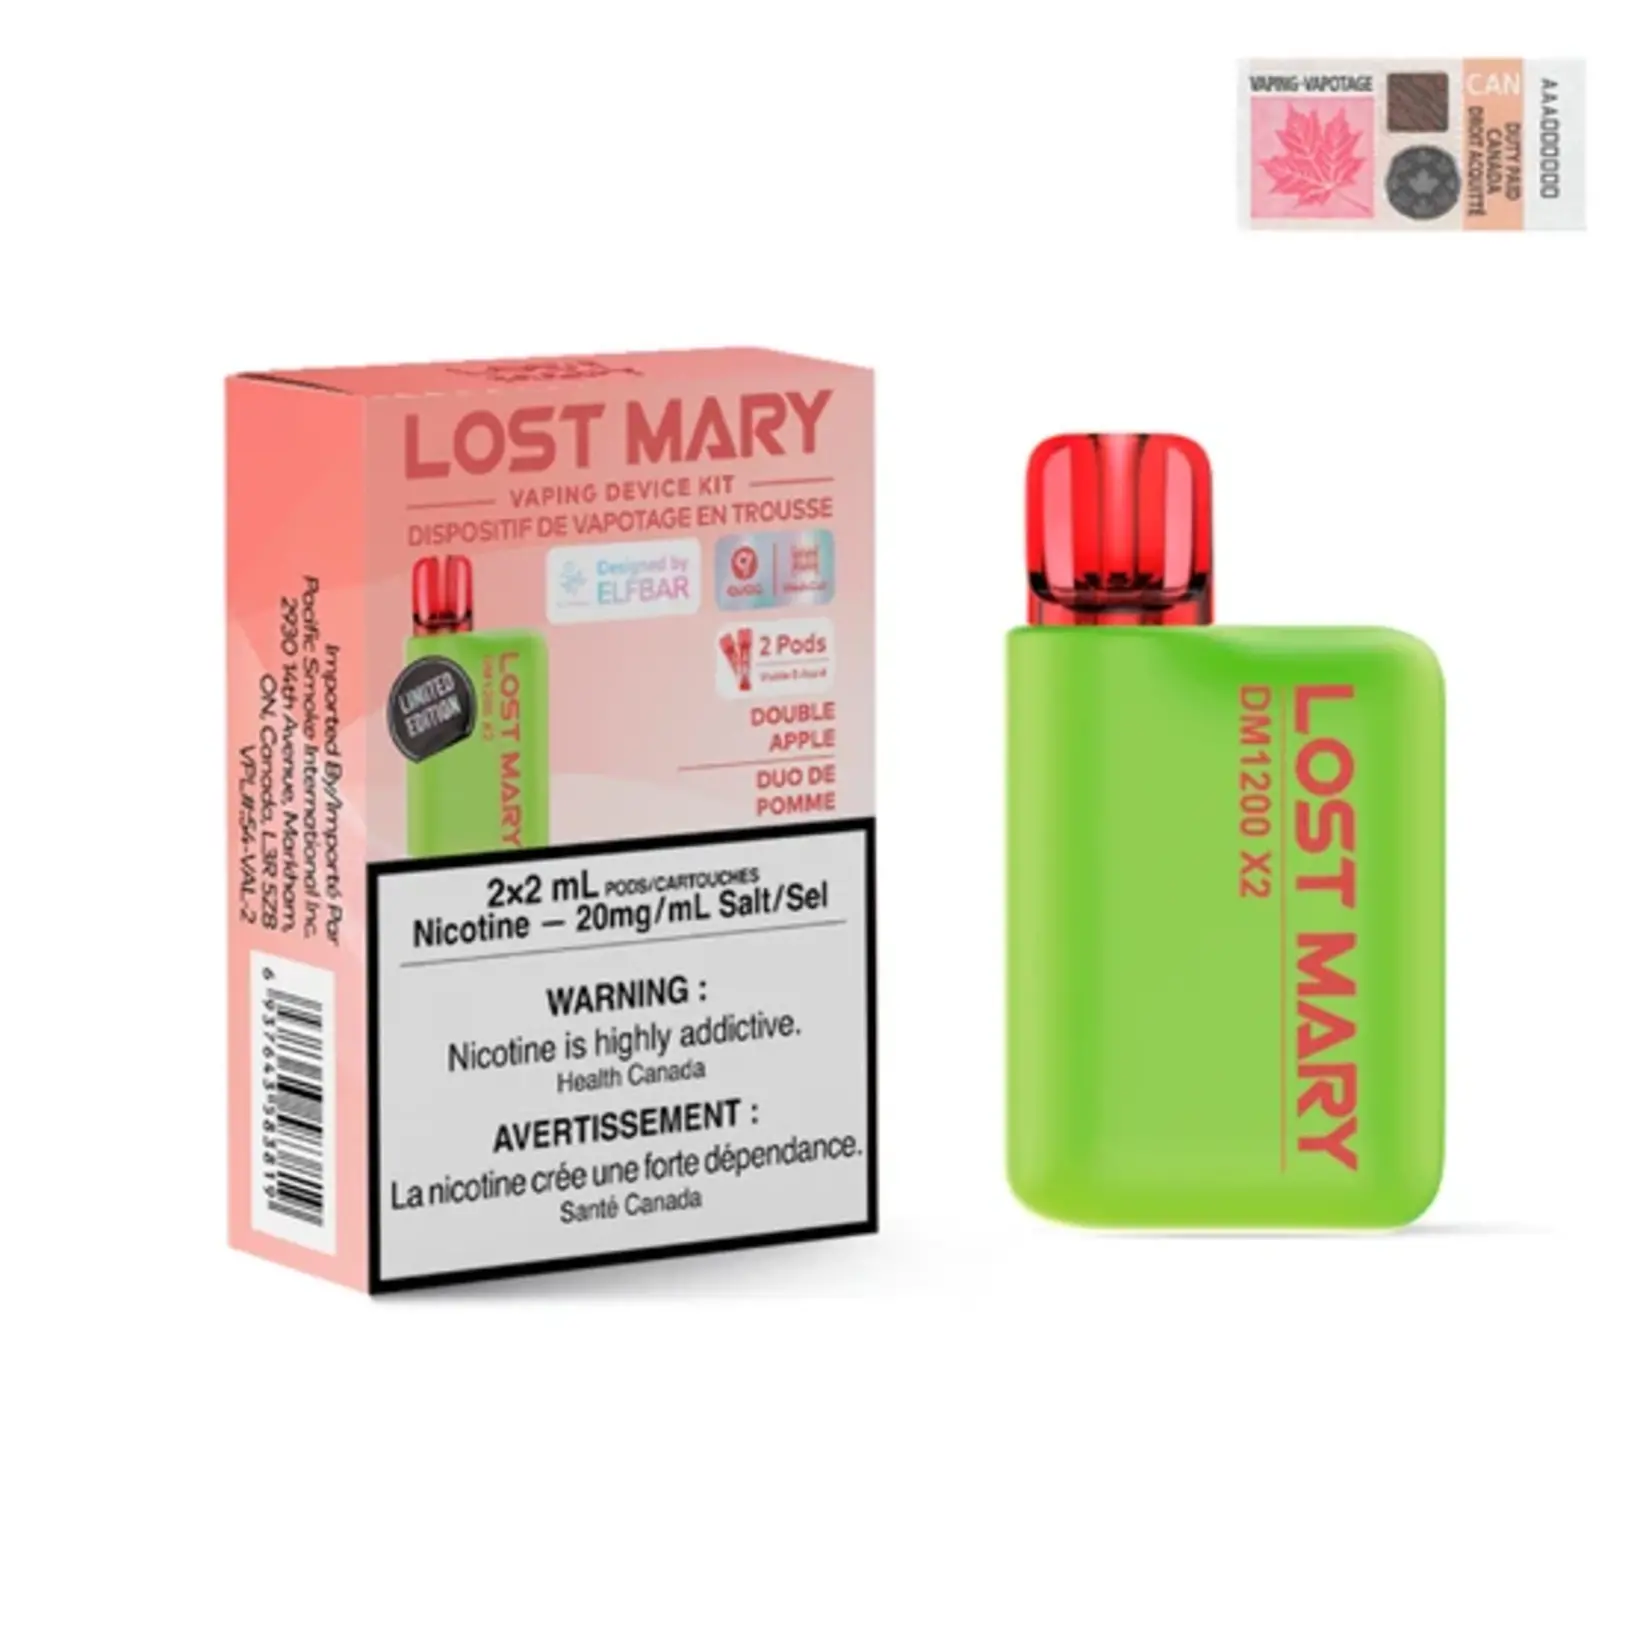 Lost Mary LOST MARY DM1200-